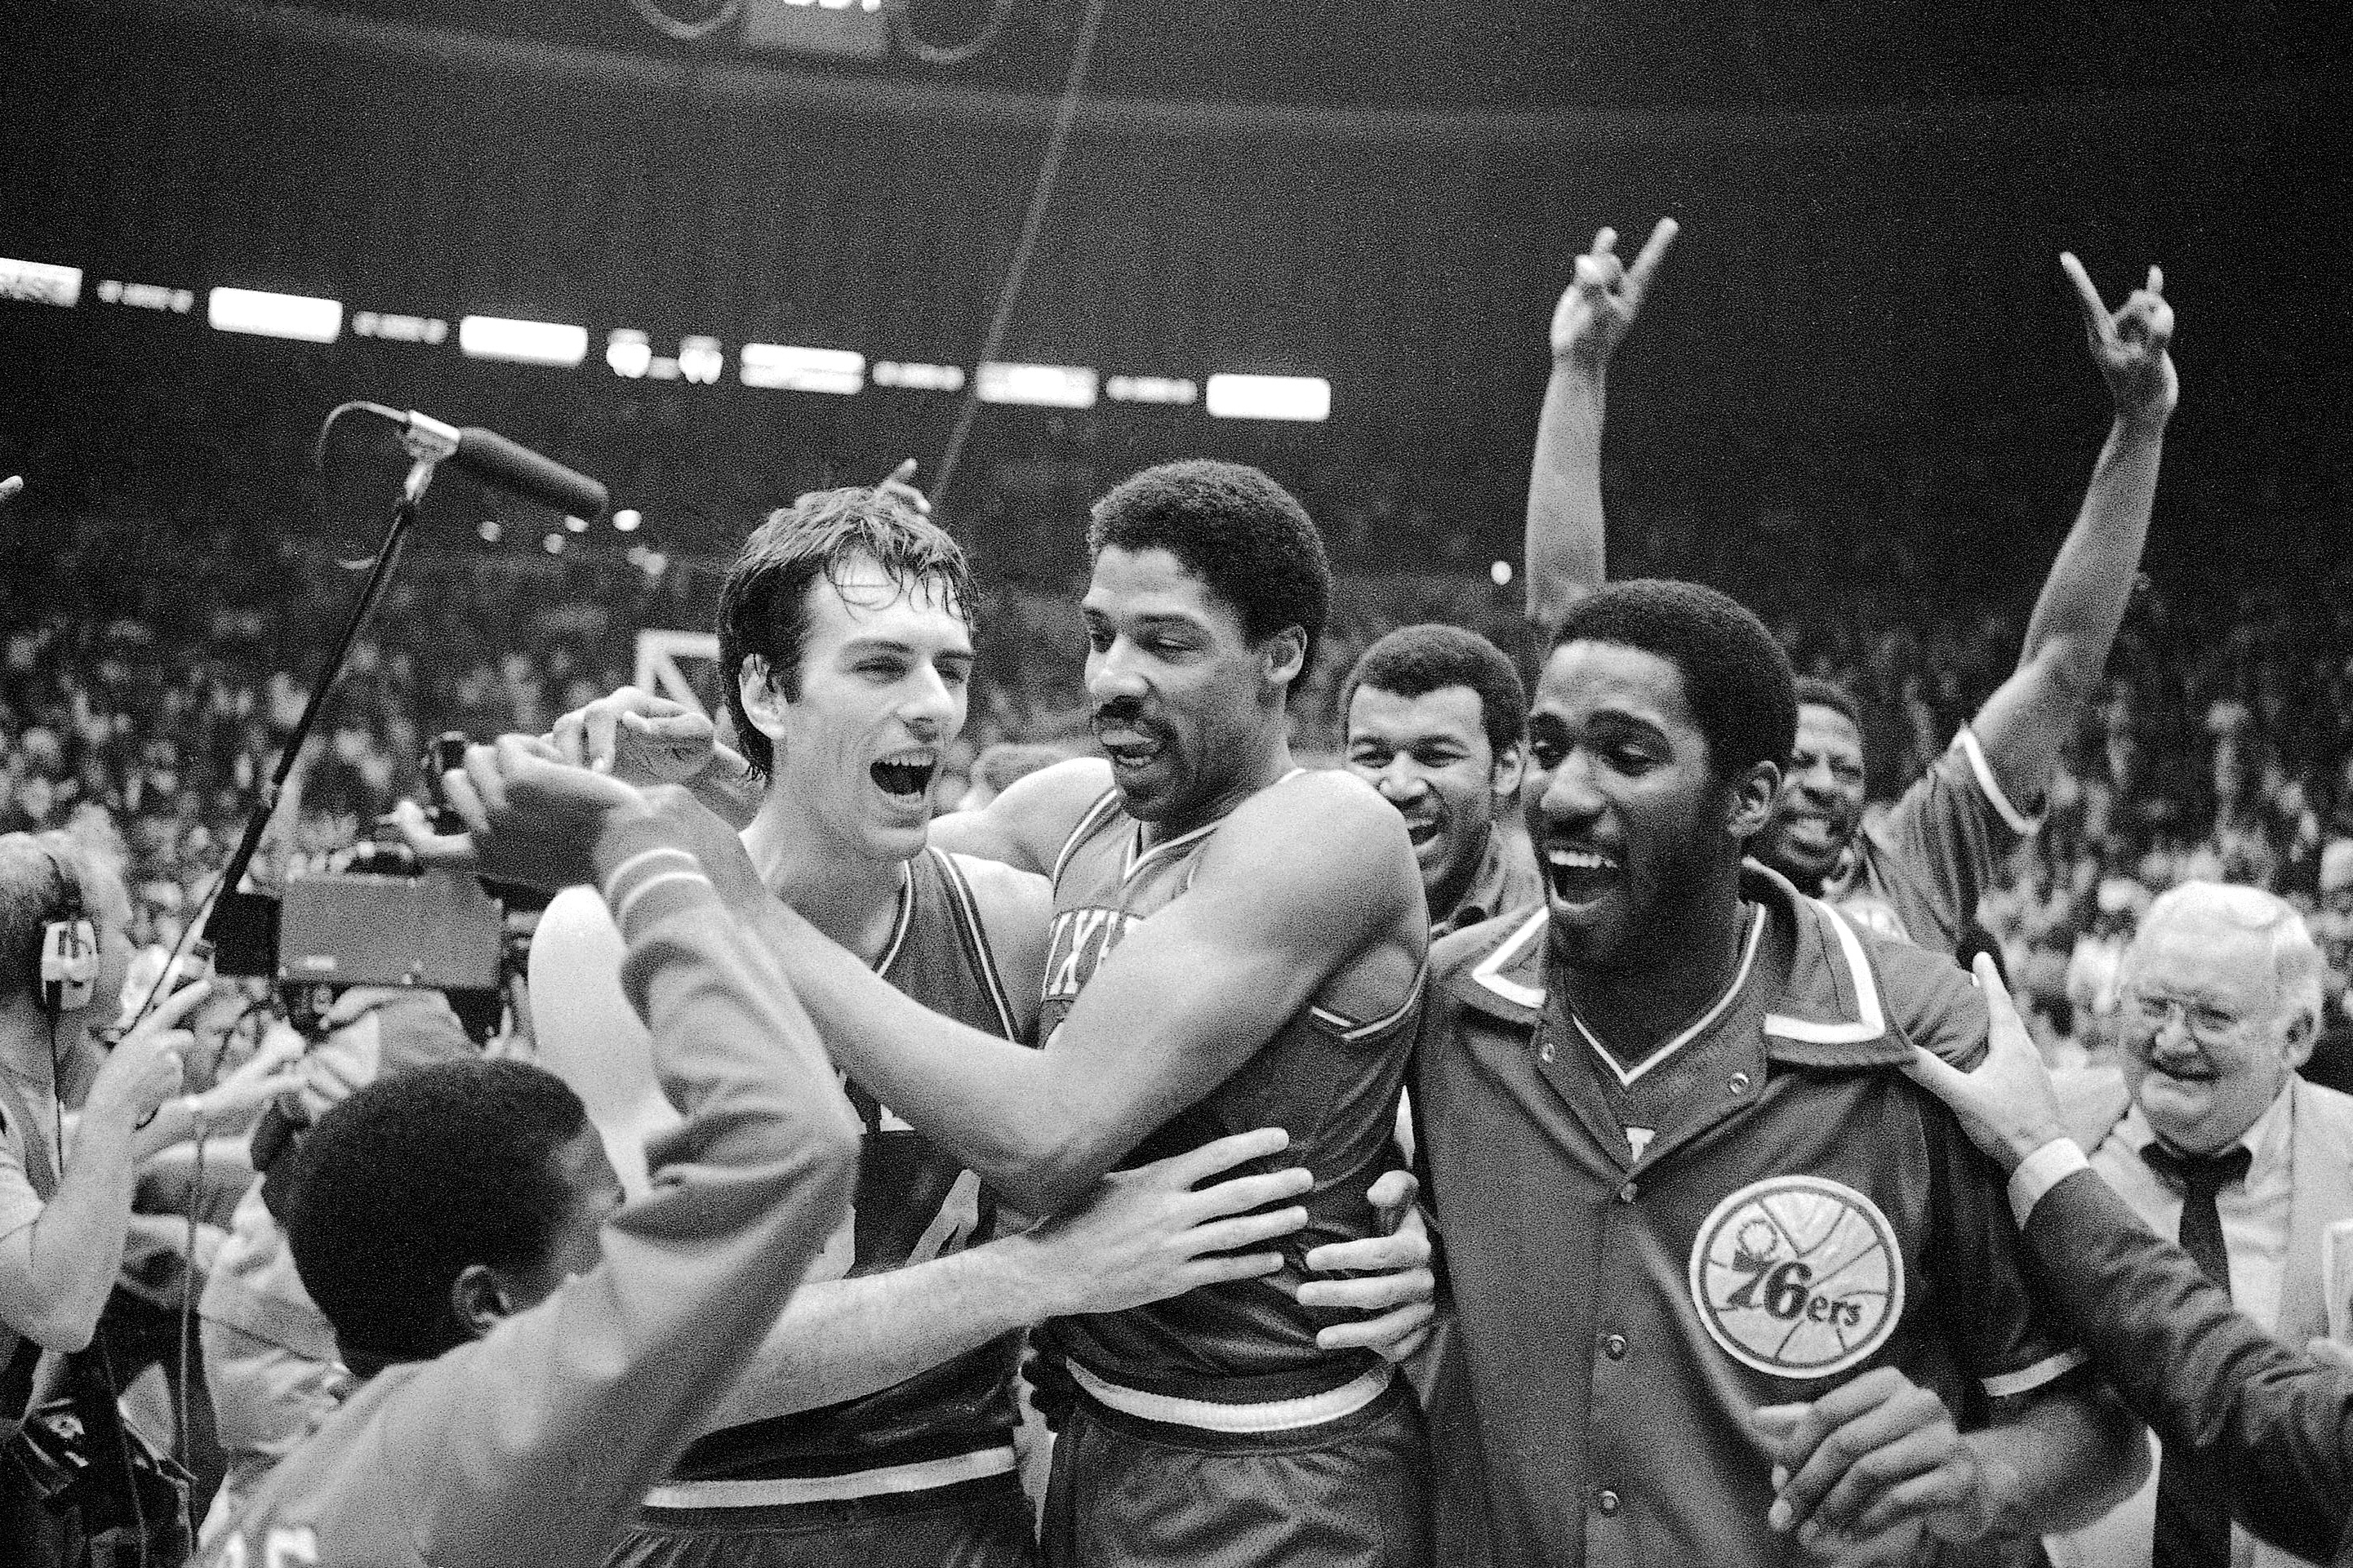 NBA 75: Dr. J's infamous layup in 1980 changed the NBA forever